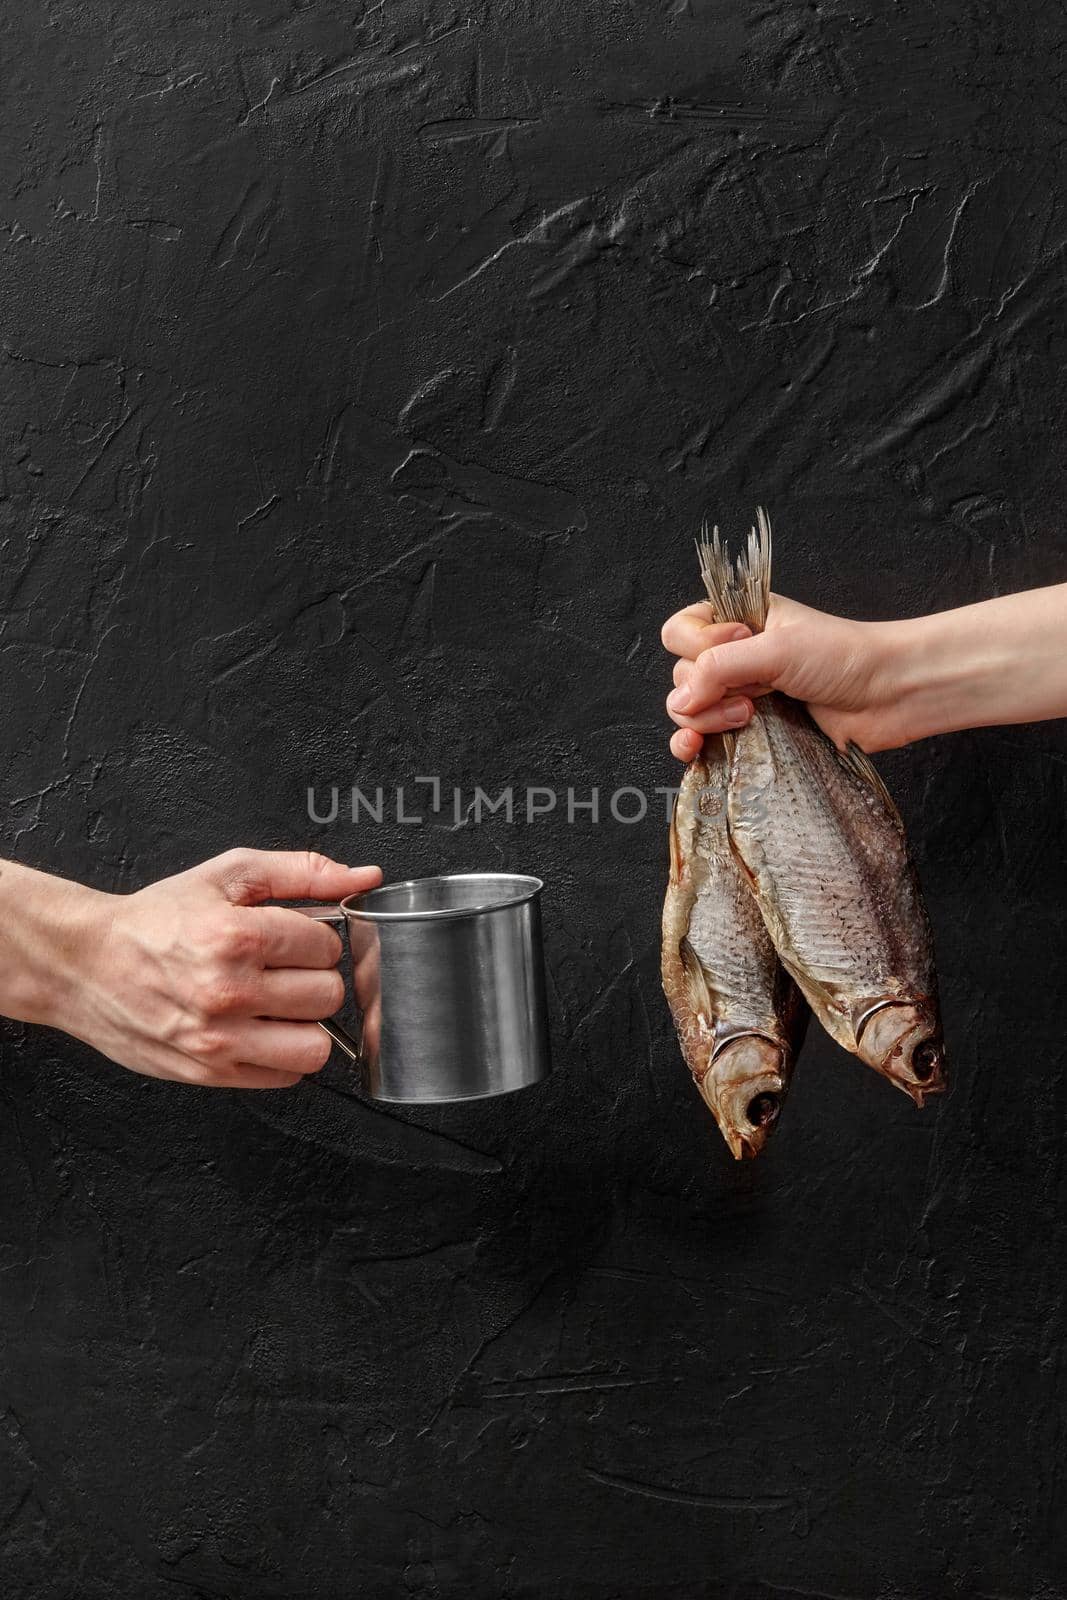 Male and female hands holding metal mug and two whole salted dried roach on background of black textured wall. Concept of traditional beer snacks